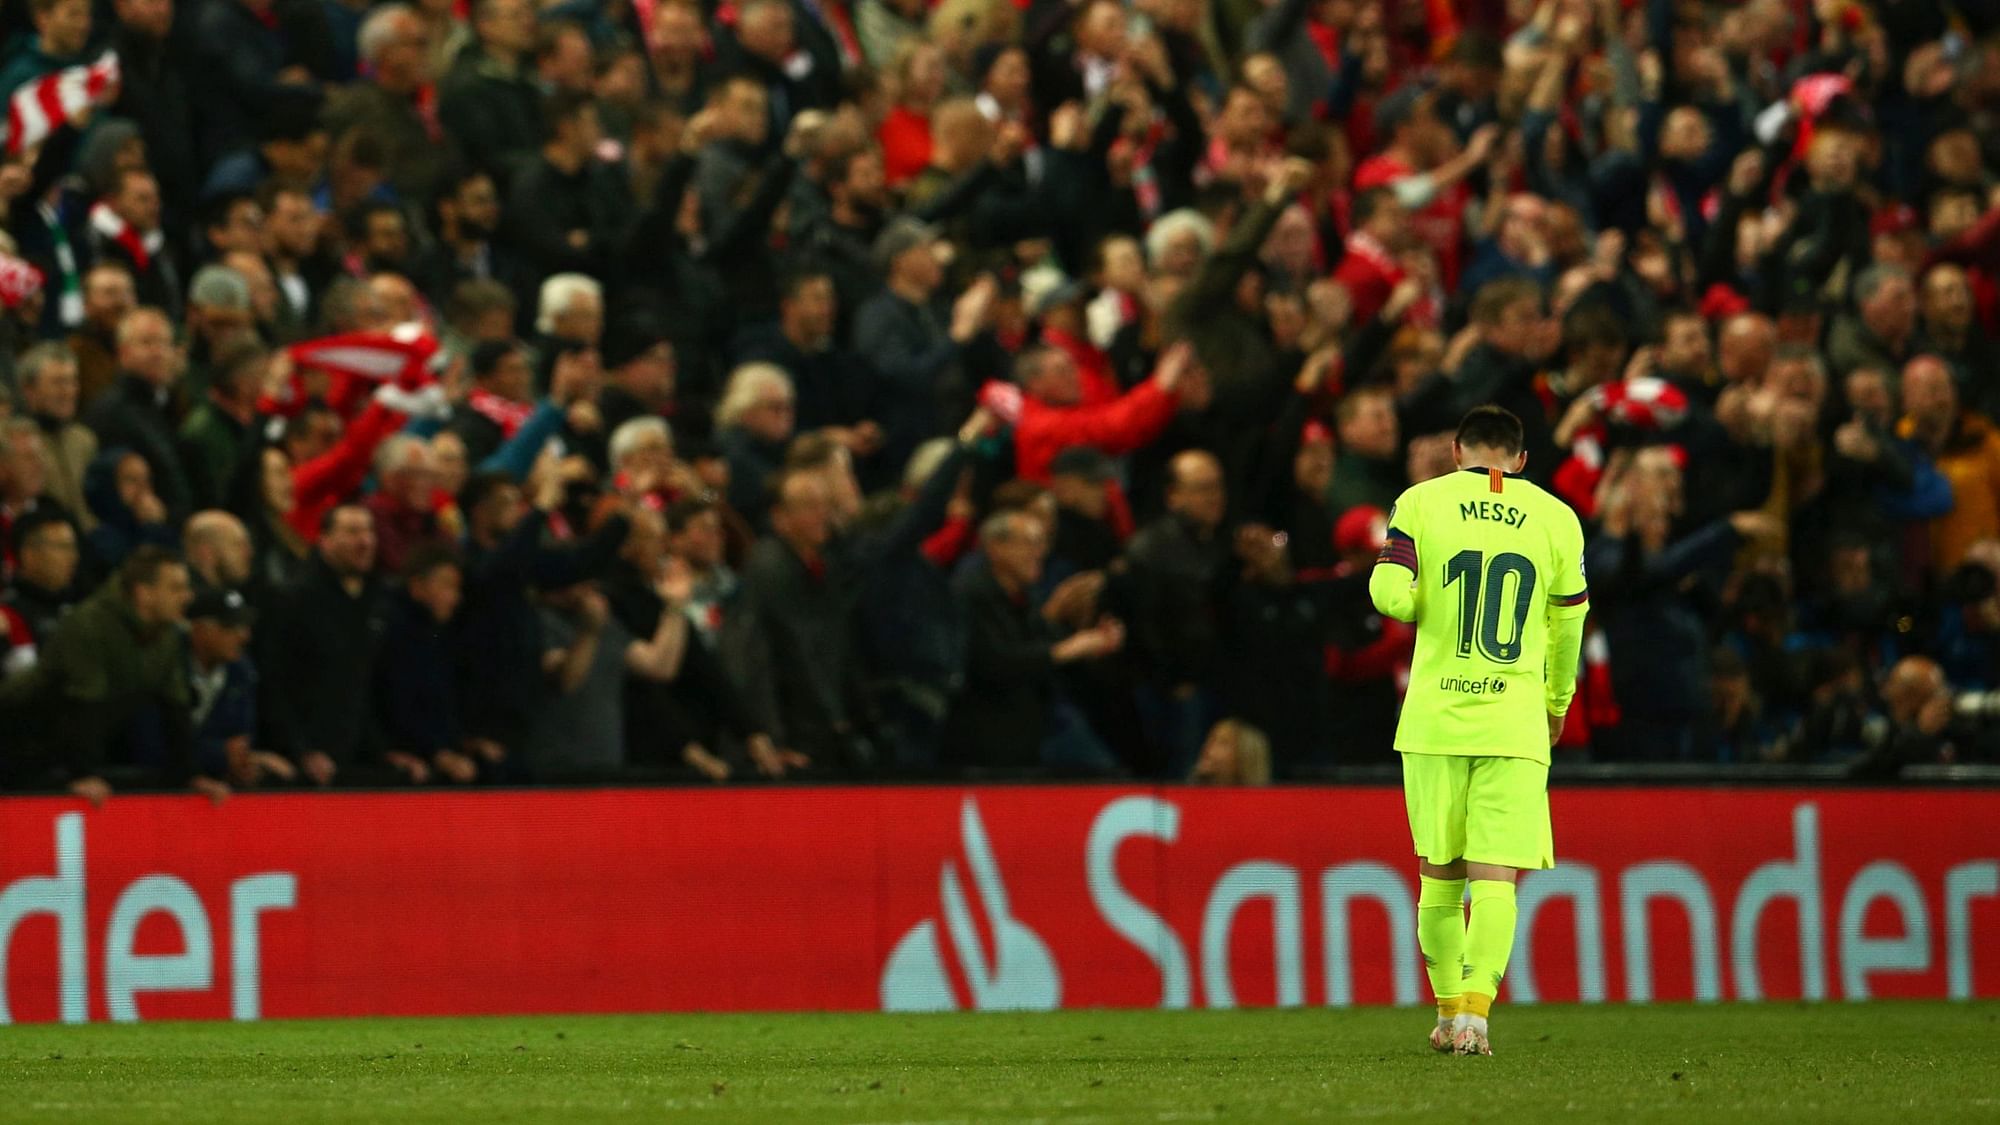 Barcelona’s Lionel Messi walks as Liverpool’s Divock Origi celebrates scoring his side’s 4th goal during the Champions League semifinal.